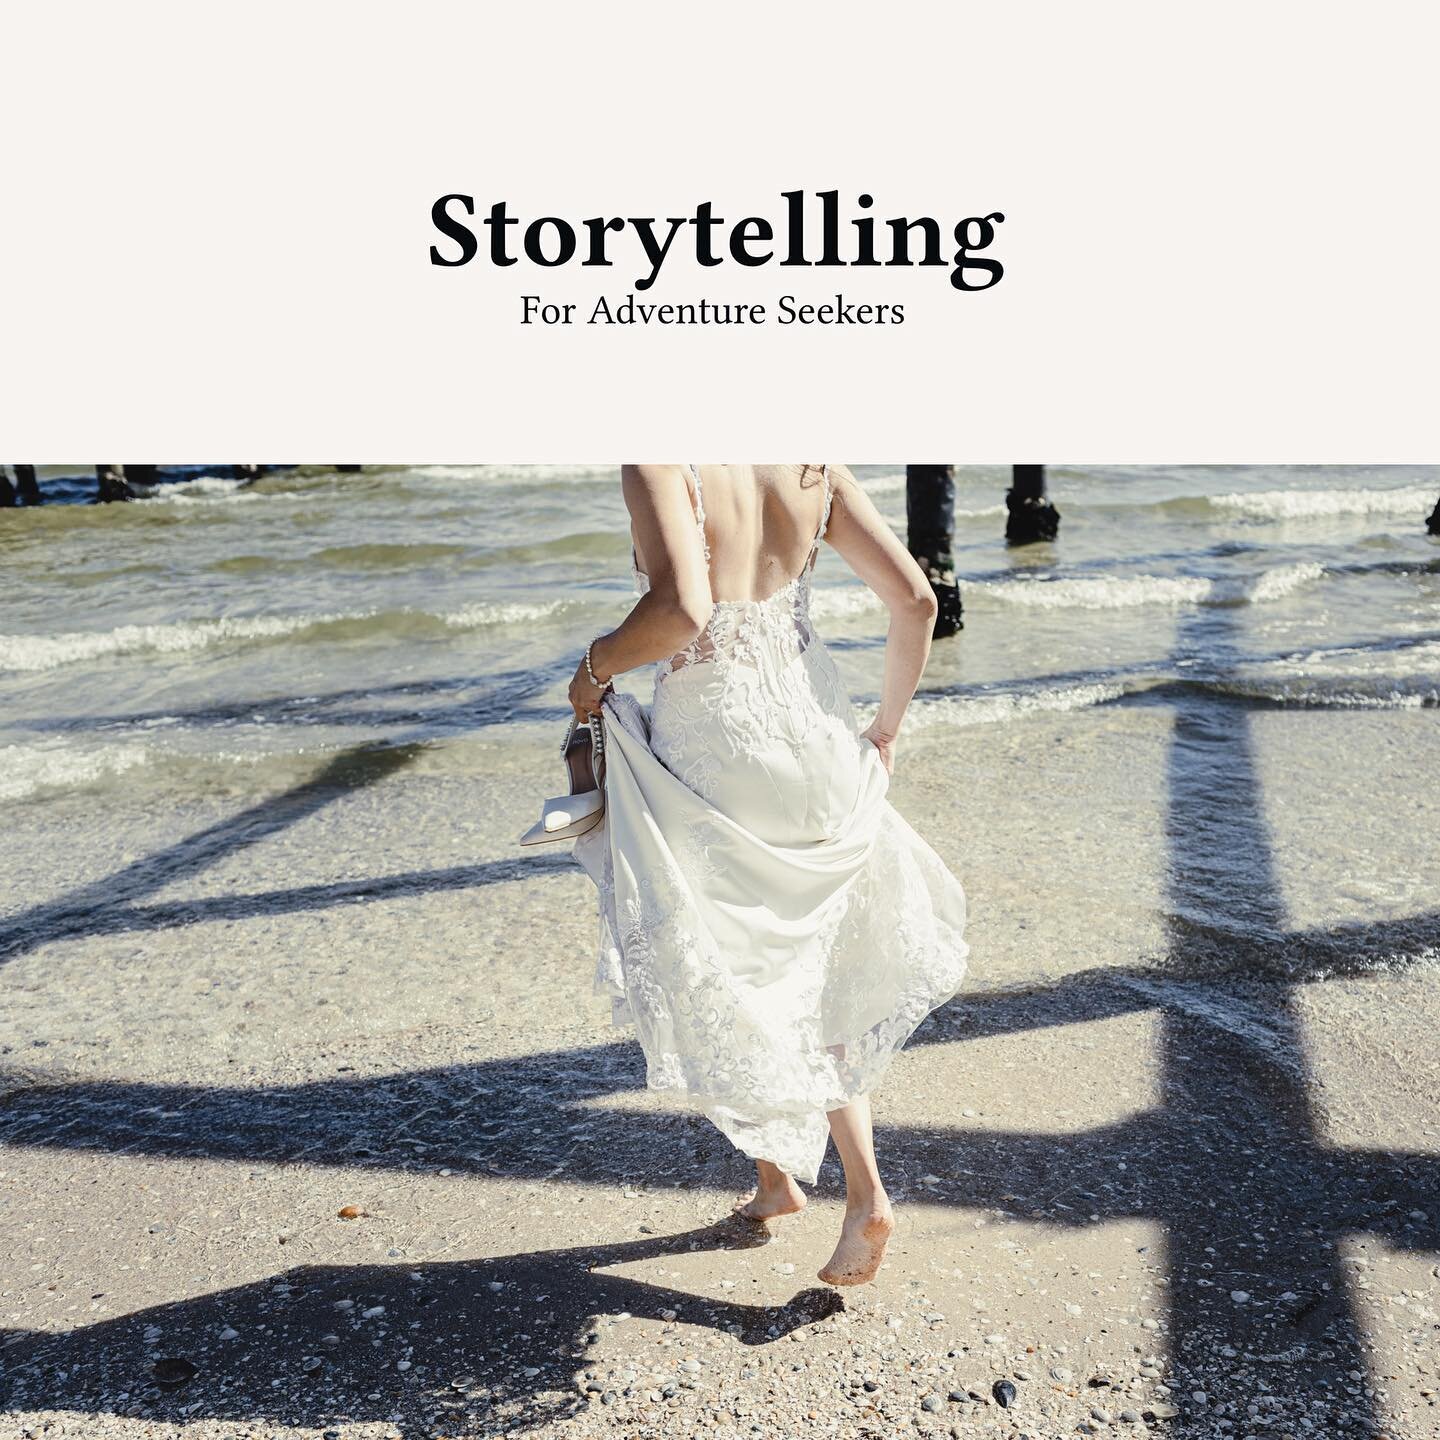 Here at Rj wedding and elopement photography we are big on sharing adventures, we honour the explorer in you, we are here as guides lovingly waking by your side creating beautiful timeless memories that tell your story the way you experienced it.

.
